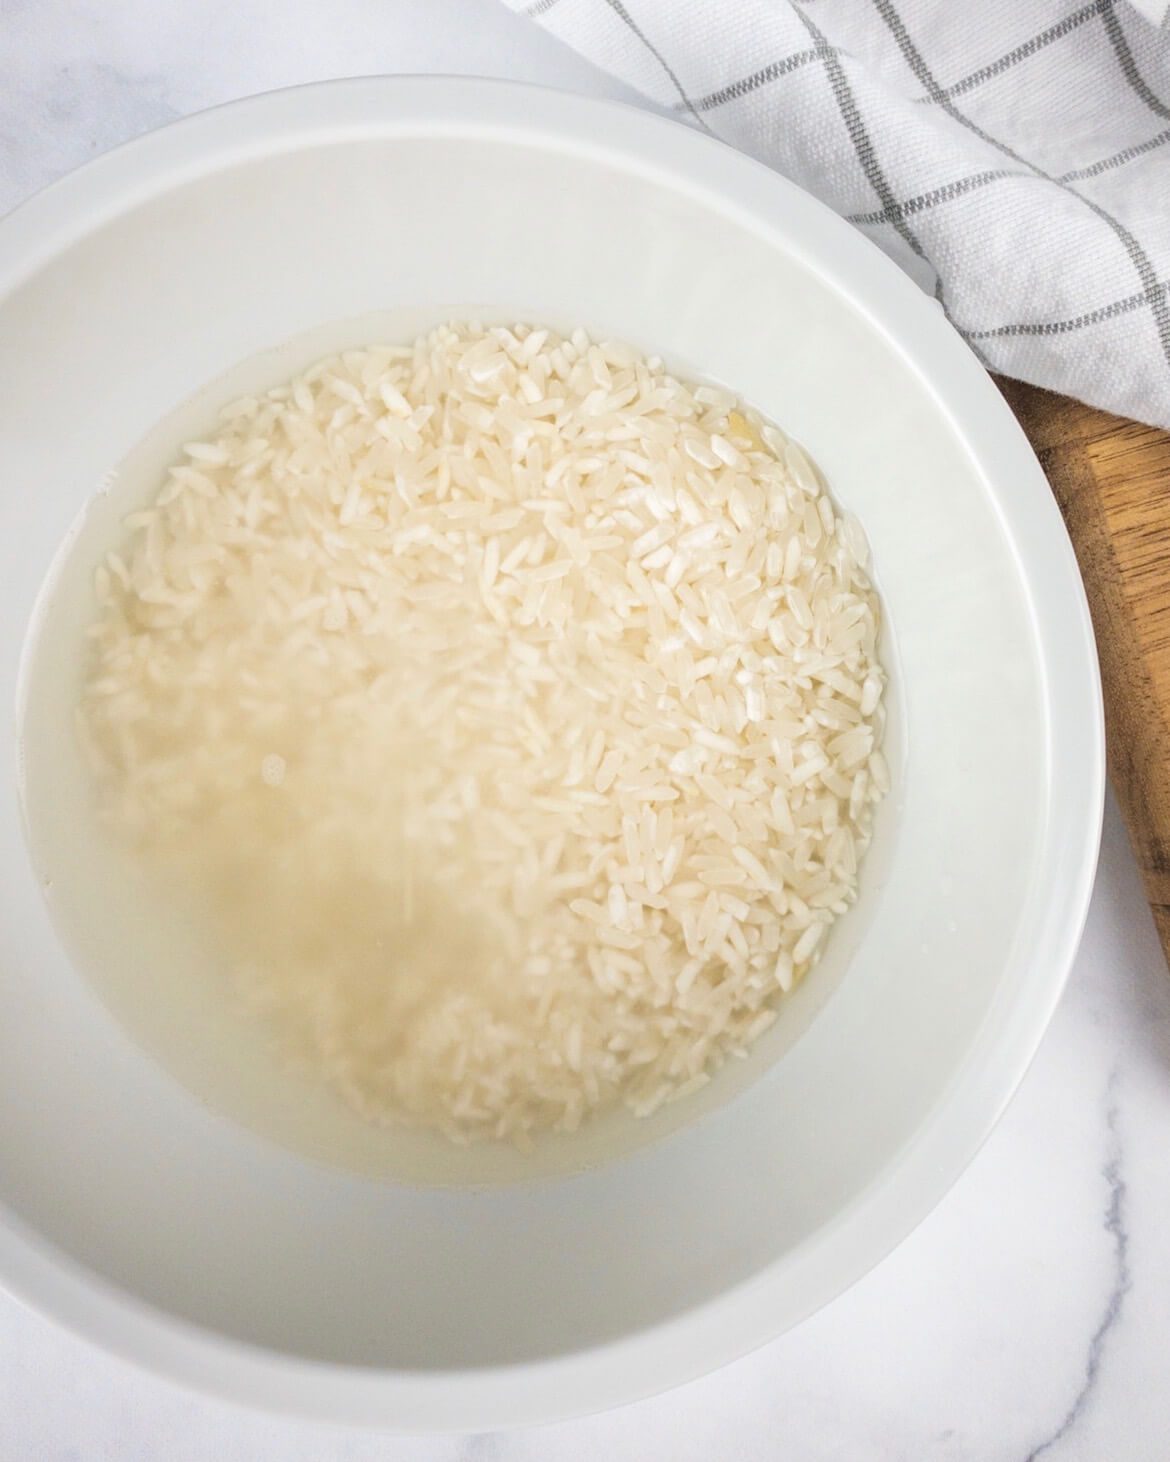 rice soaking in water in a bowl on marble surface